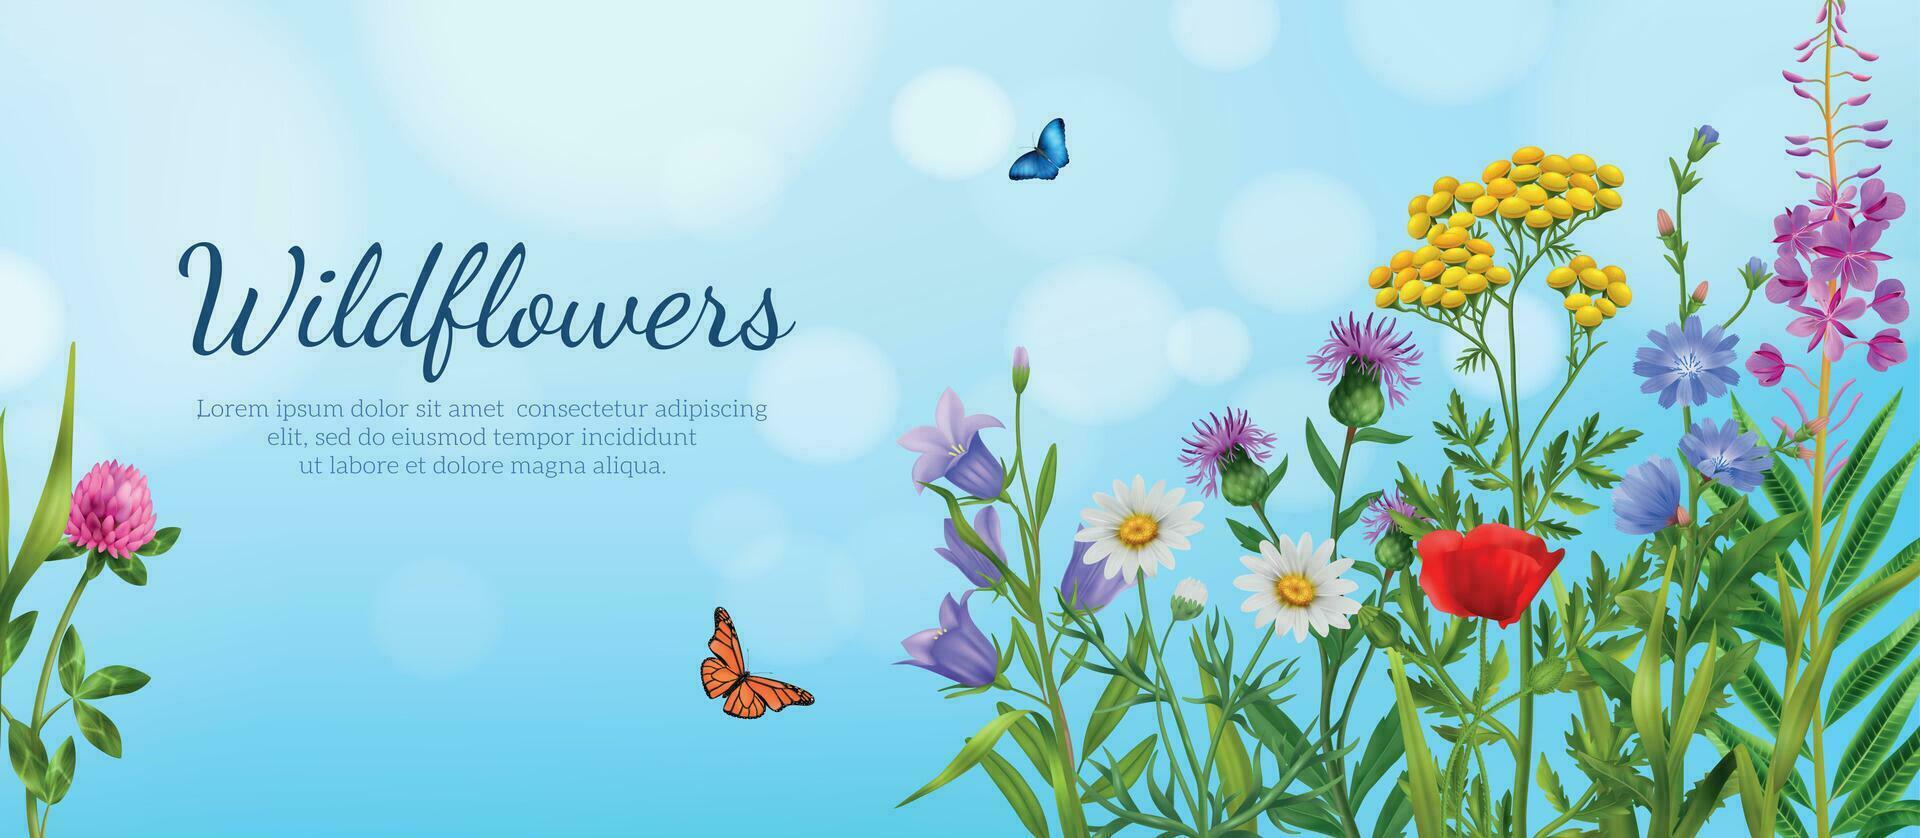 Realistic Wildflowers Poster vector